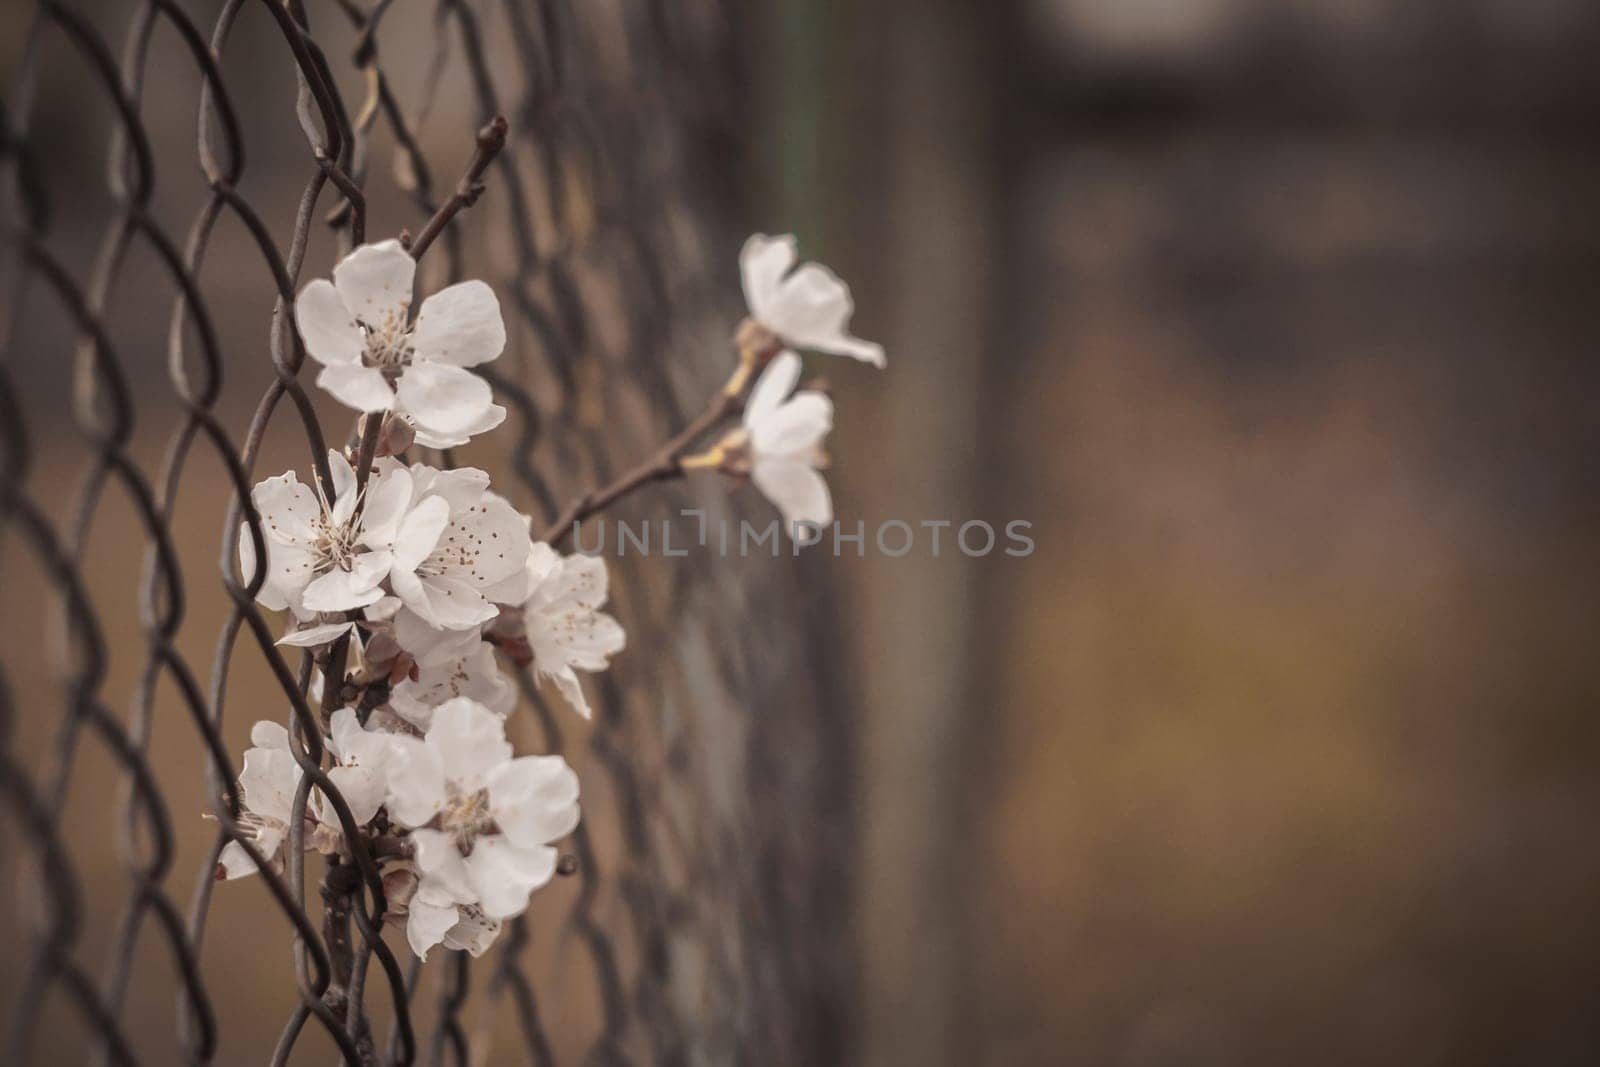 A sad picture of a flower in an iron fence. by Yurii73